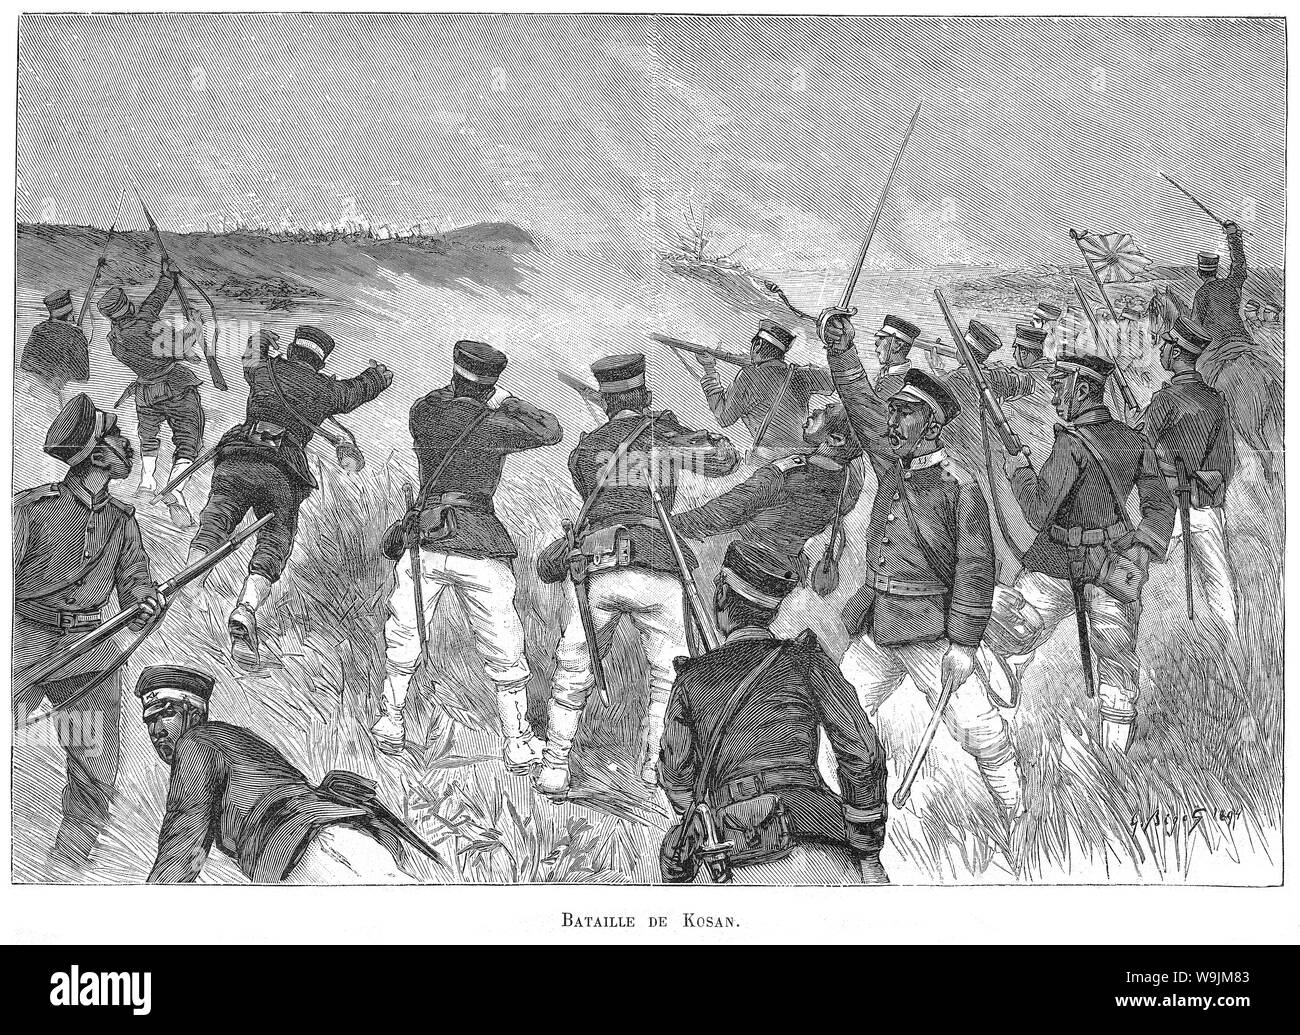 [ 1890s Japan - First Sino-Japanese War (1894–1895) ] —   Japanese Imperial forces in action during the First Sino-Japanese War (1894–1895).   Published in the French illustrated weekly Le Monde illustré on January 12, 1895 (Meiji 28). Art by French artist Georges Ferdinand Bigot (1860-1927), famous for his satirical cartoons of life in Meiji period Japan.  19th century vintage newspaper illustration. Stock Photo